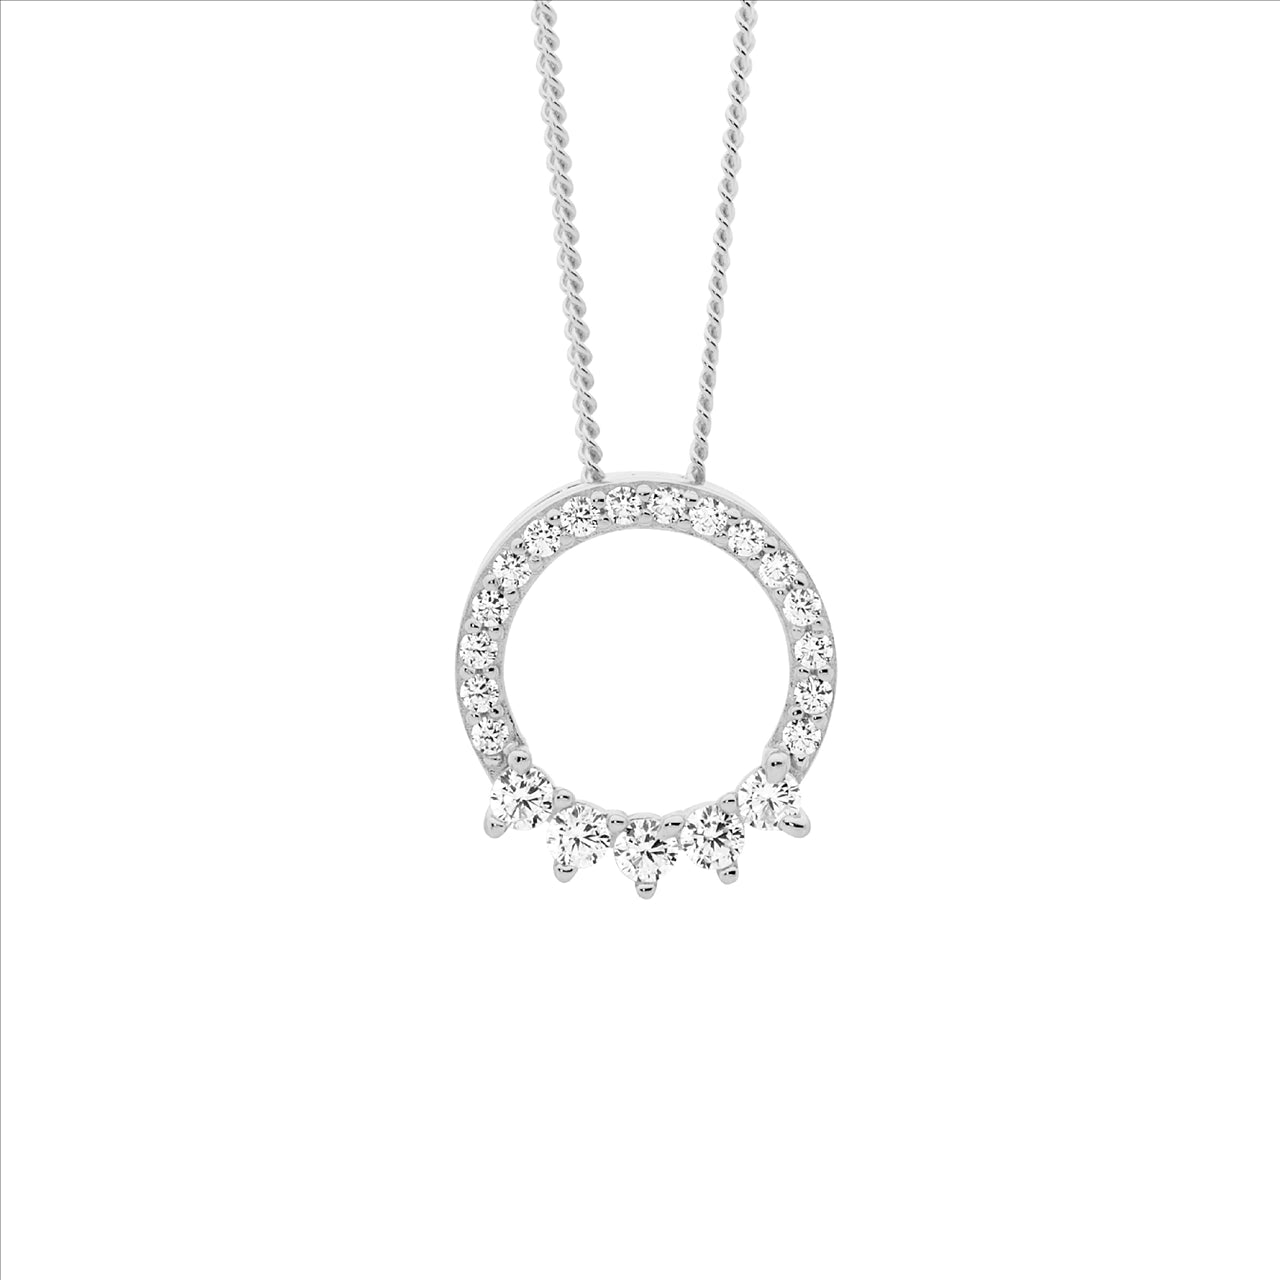 Sterling Silver Circle Pendant with 5x CZ